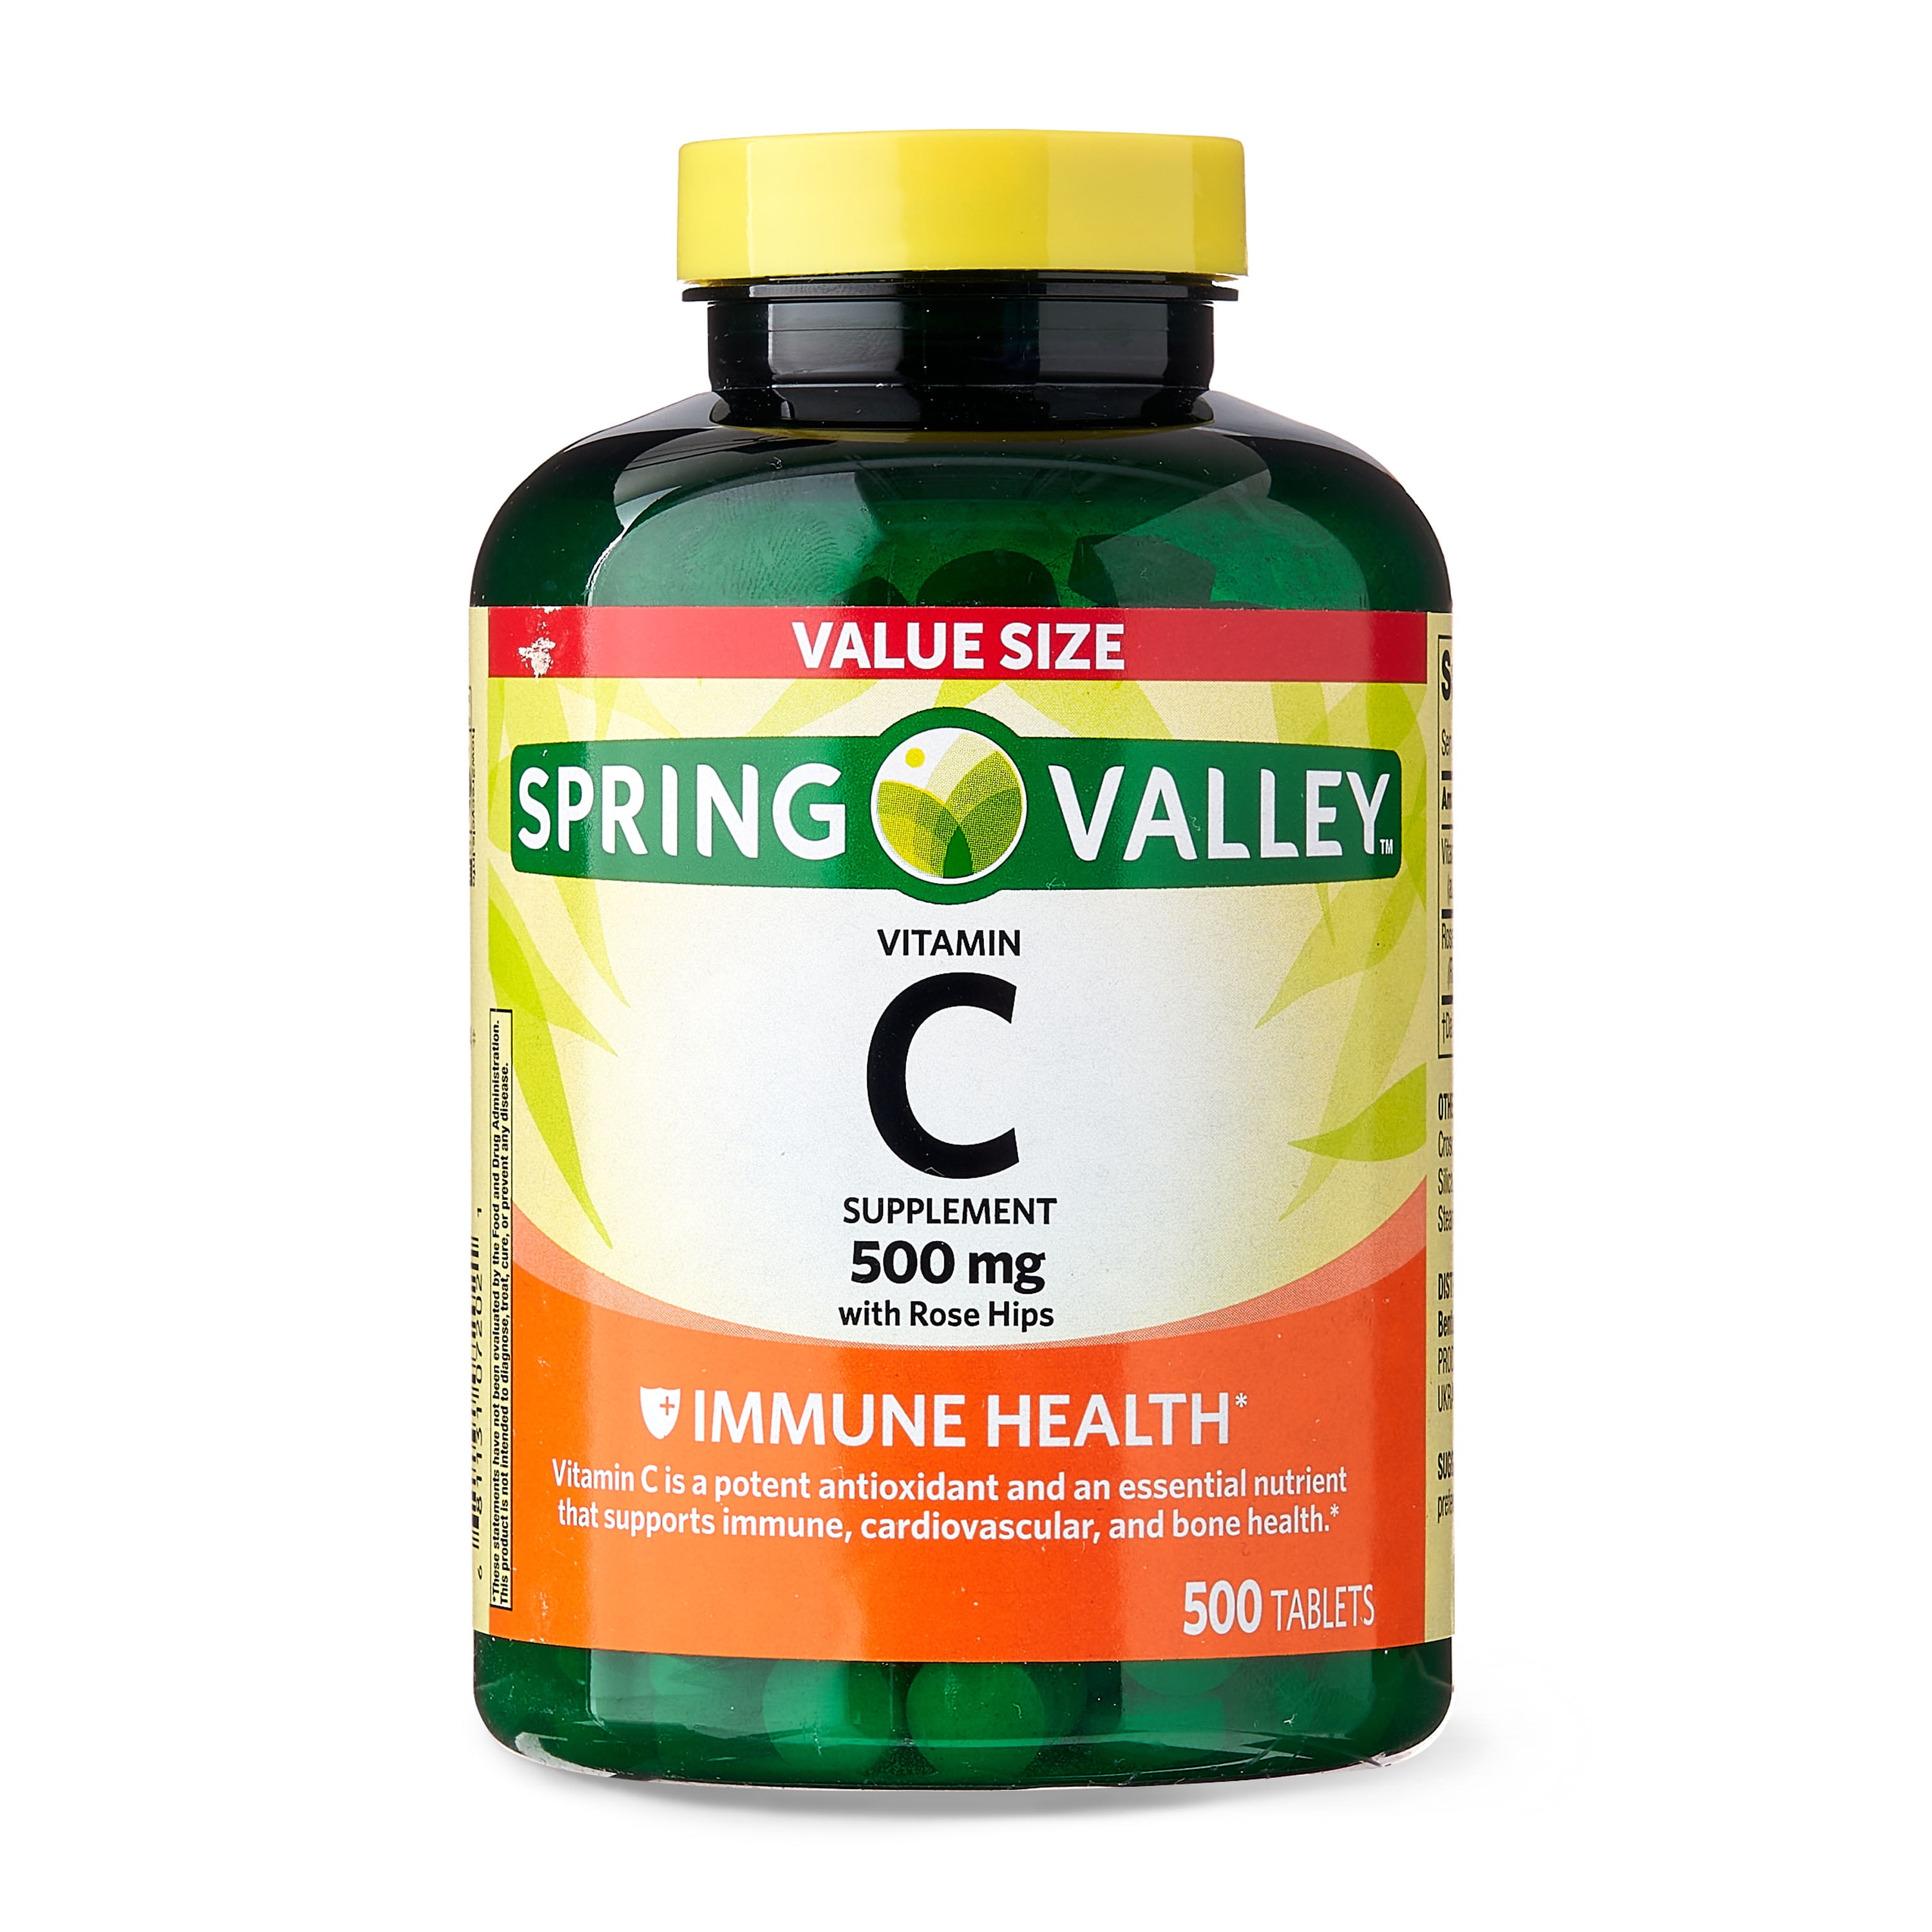 Spring Valley Vitamin C Supplement with Rose Hips, 500 mg, 500 Count